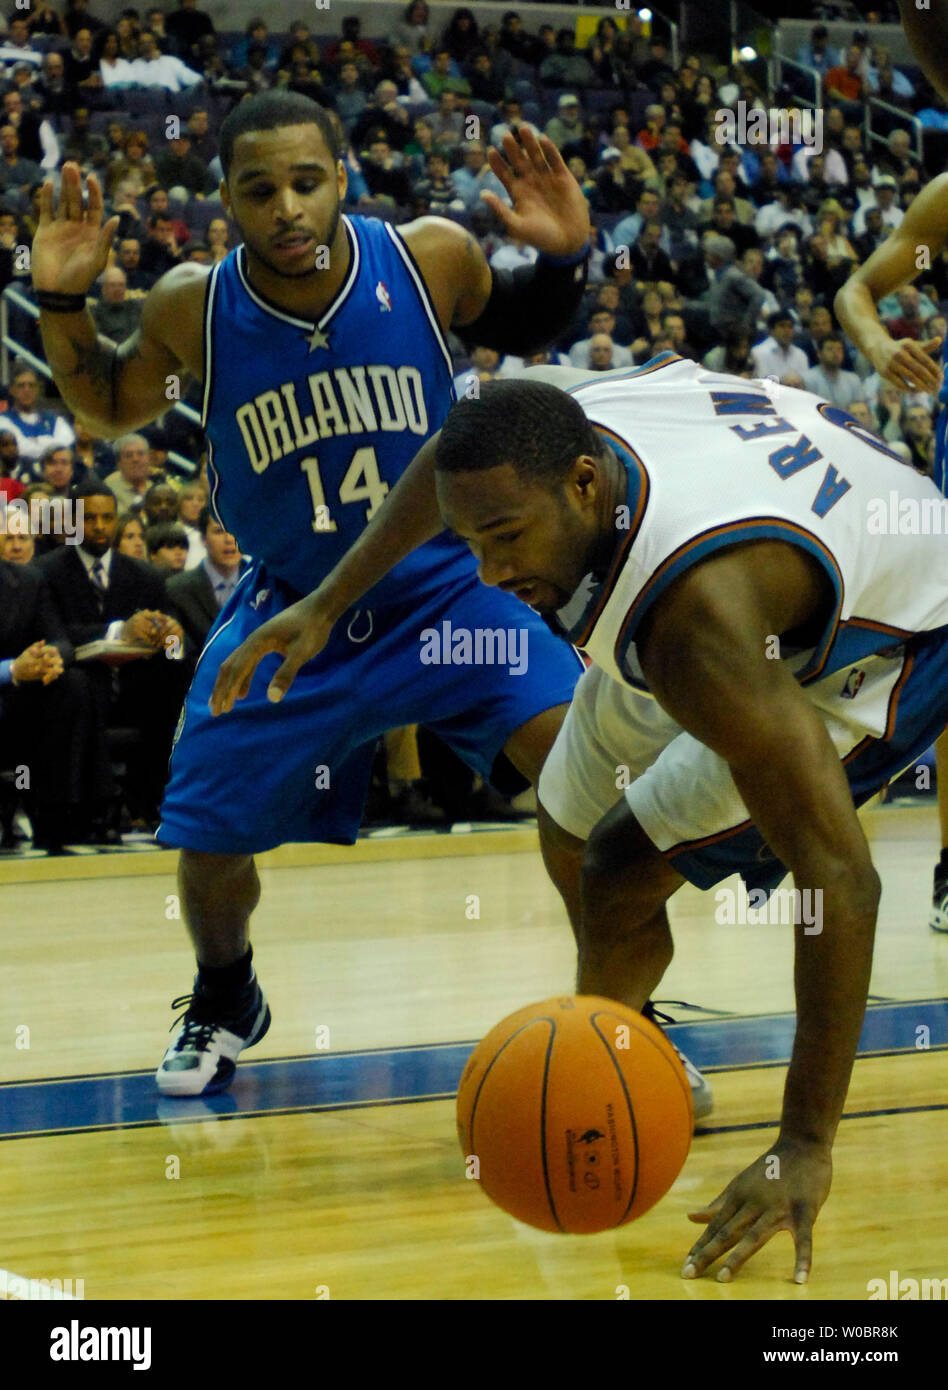 The Washington Wizards guard Gilbert Arenas dives for a loose ball in the first half against the Orlando Magic's Jameer Nelson (14) on December 29, 2006 at Verizon Center in Washington, D.C.  (UPI Photo/ Mark Goldman) Stock Photo